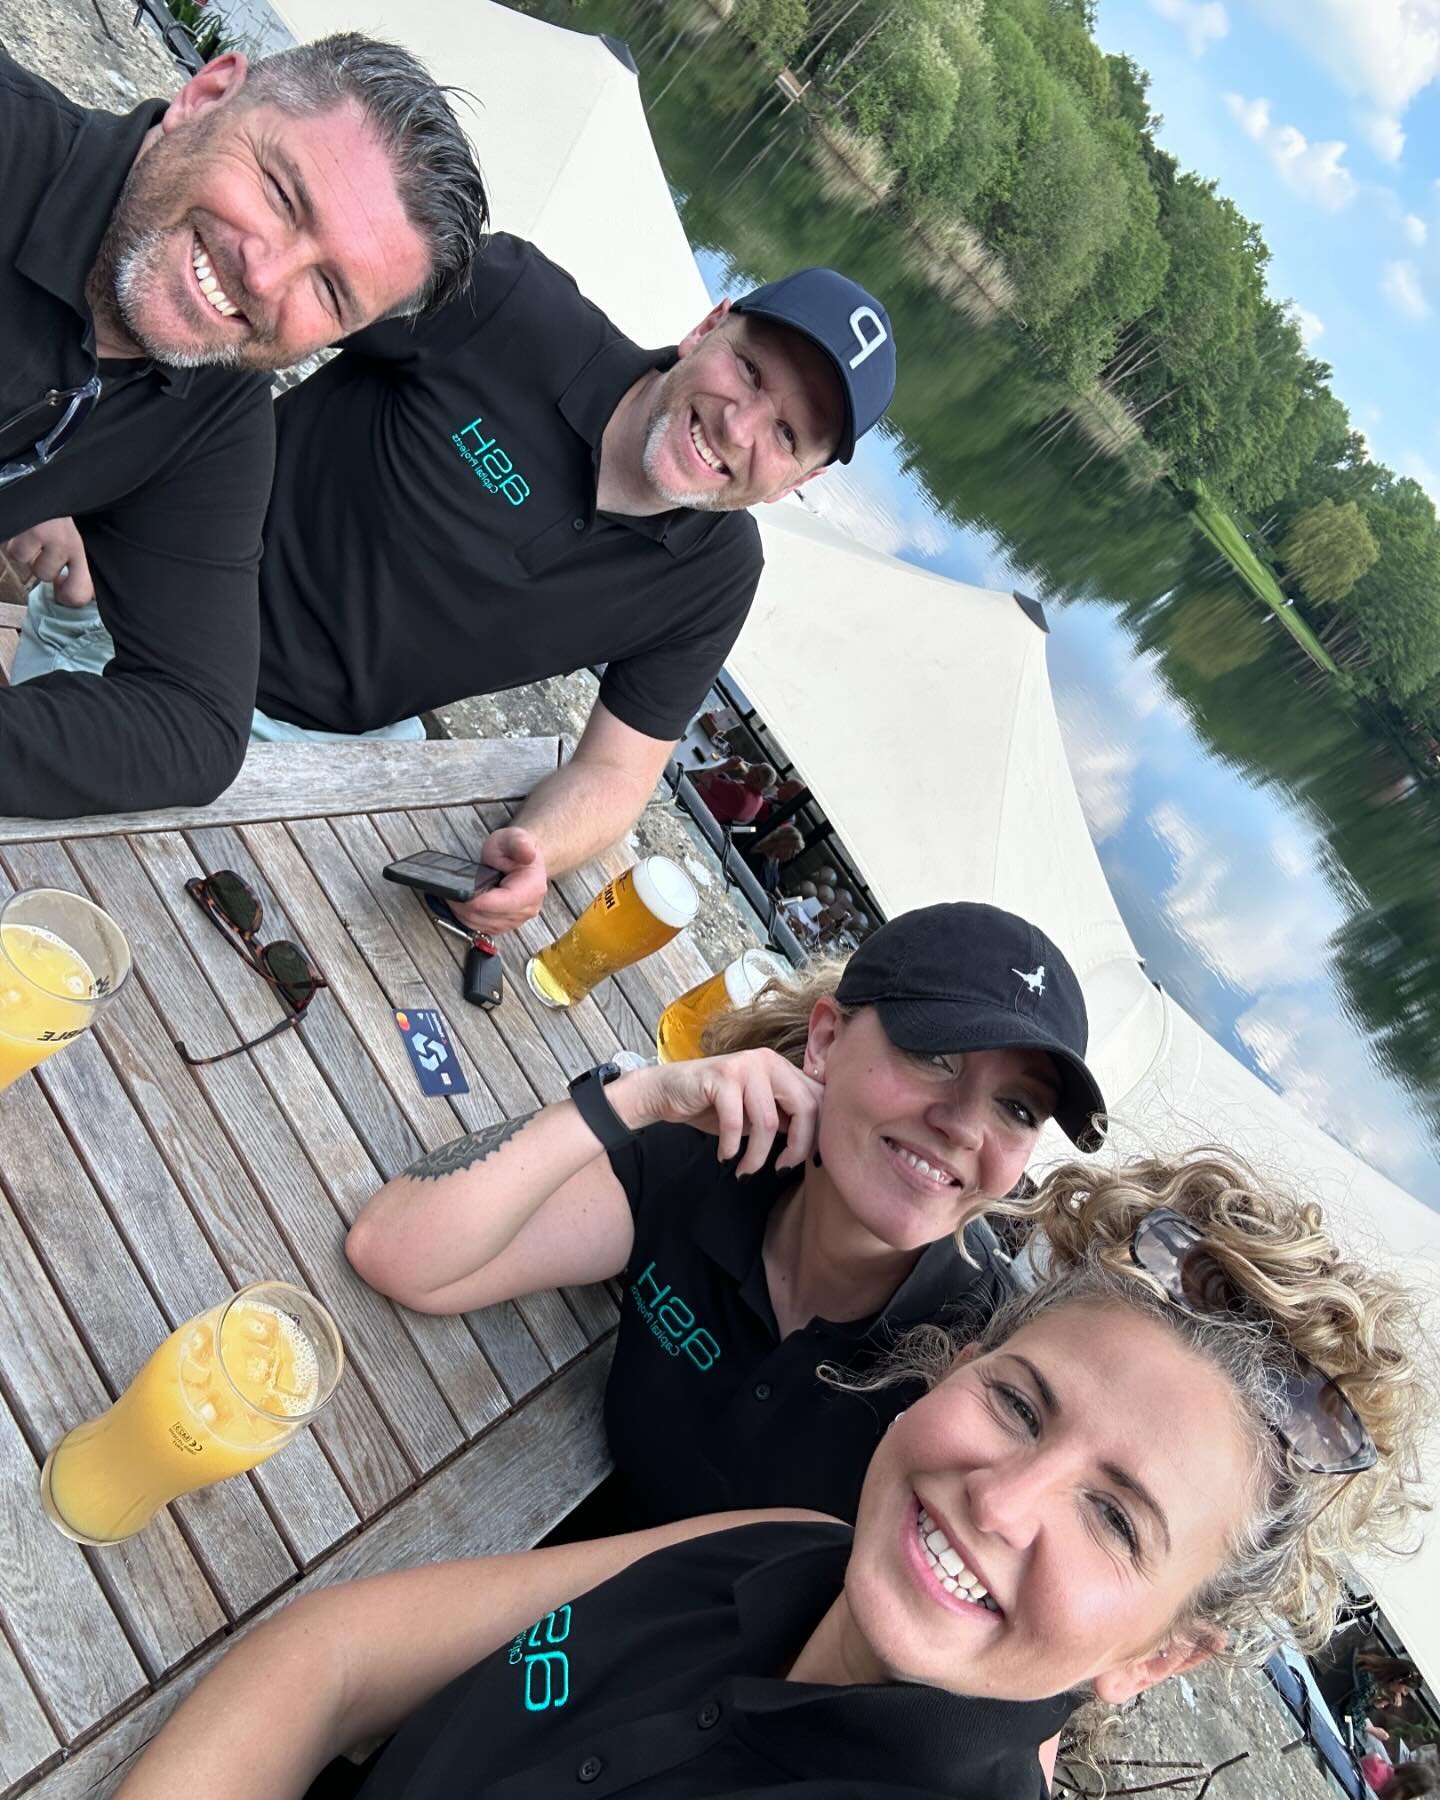 Thanks to @3bmltd for a great golf day. We lost some balls but we had some fun! 
 Well done 7-iron and a great round! ⛳️🏌🏼&zwj;♂️🏌🏼&zwj;♀️🏌🏼&zwj;♂️🏌🏼&zwj;♀️